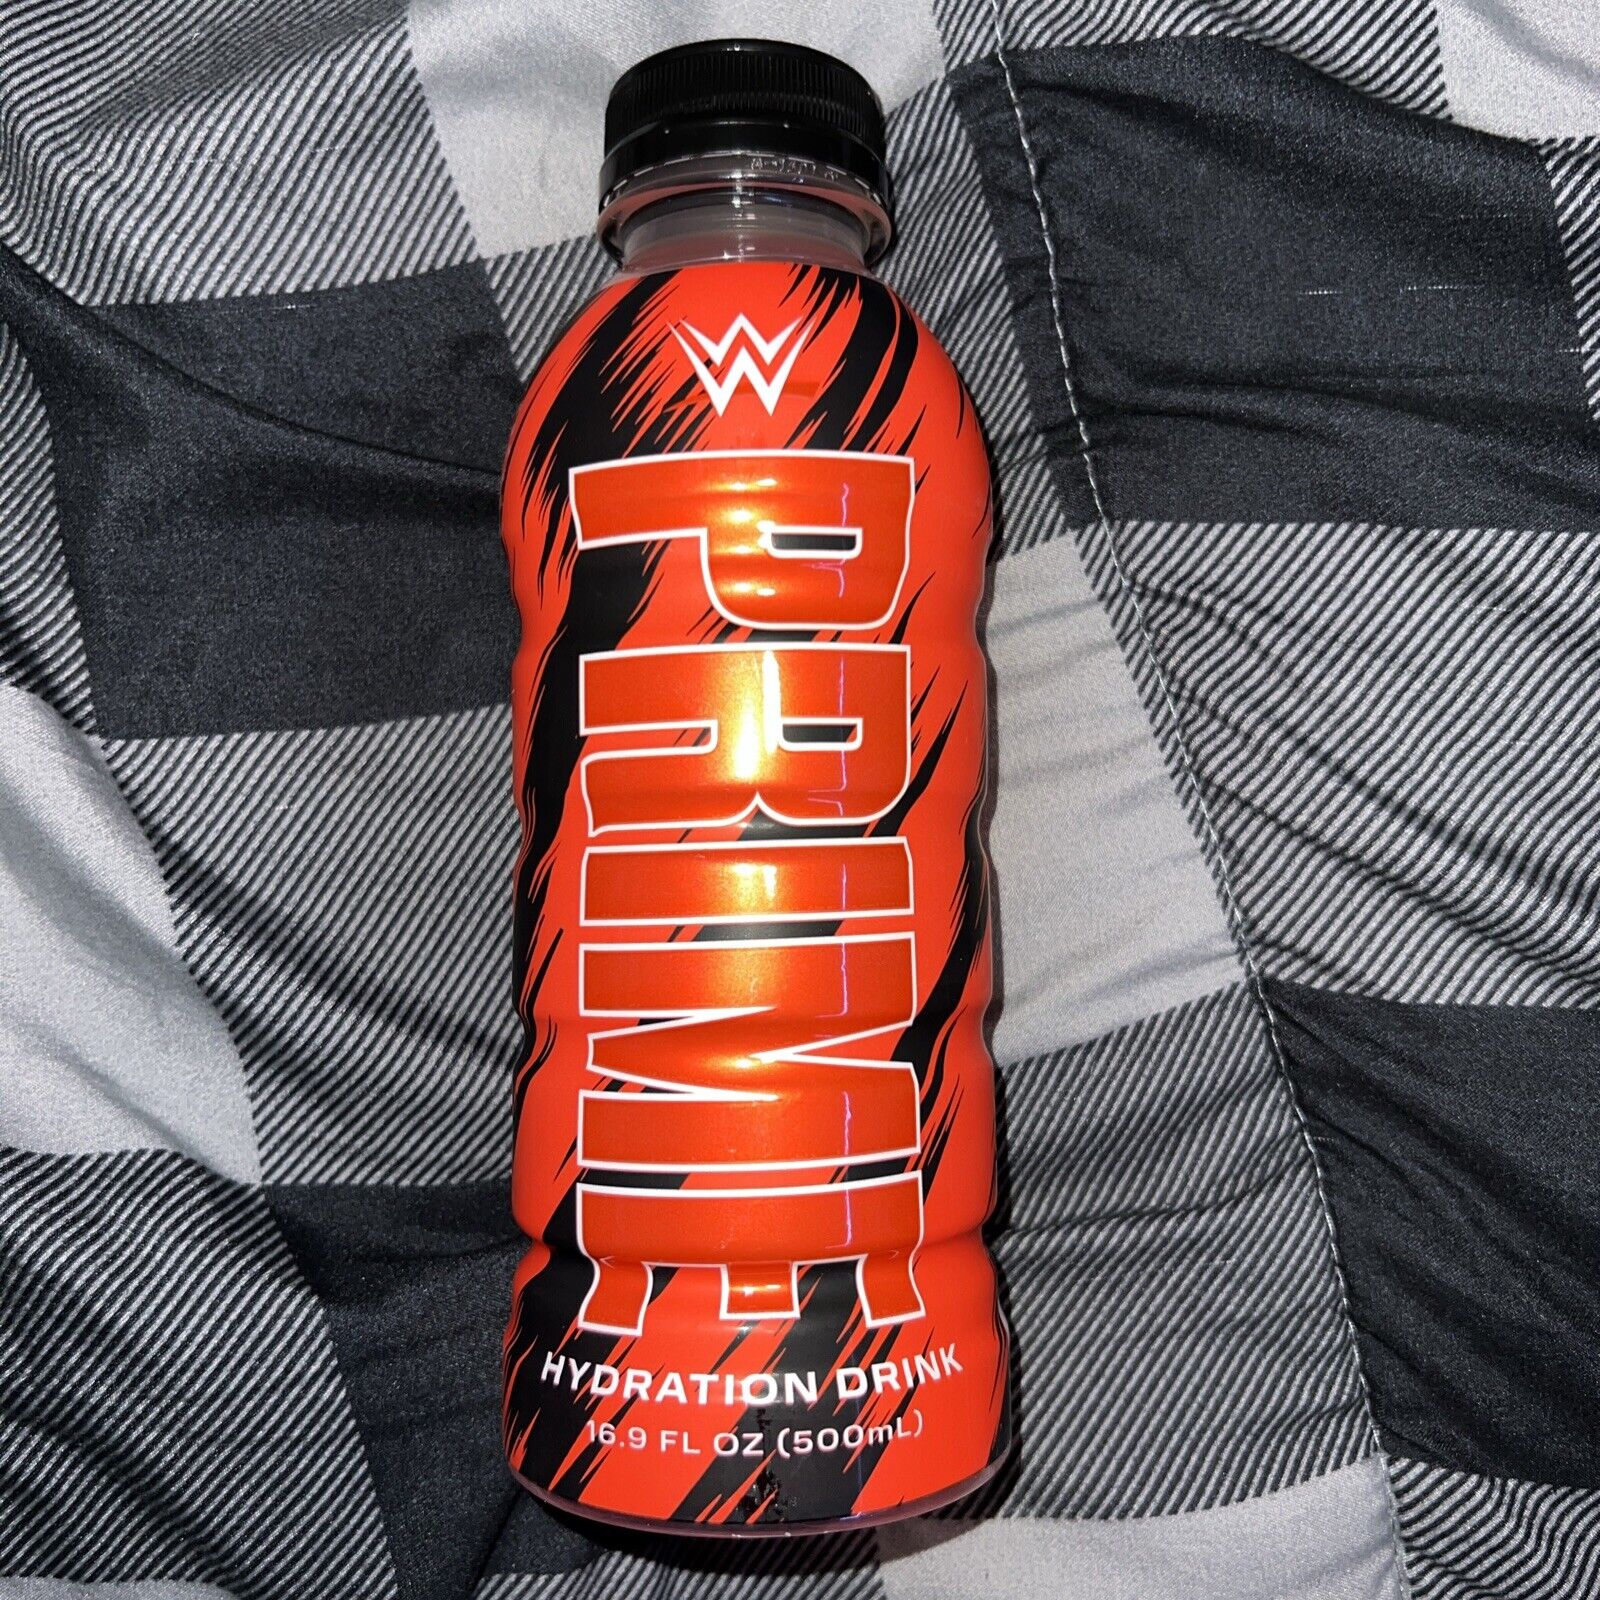 Prime Hydration WWE Bottle Unopened/Brand new USA SHIP ONLY